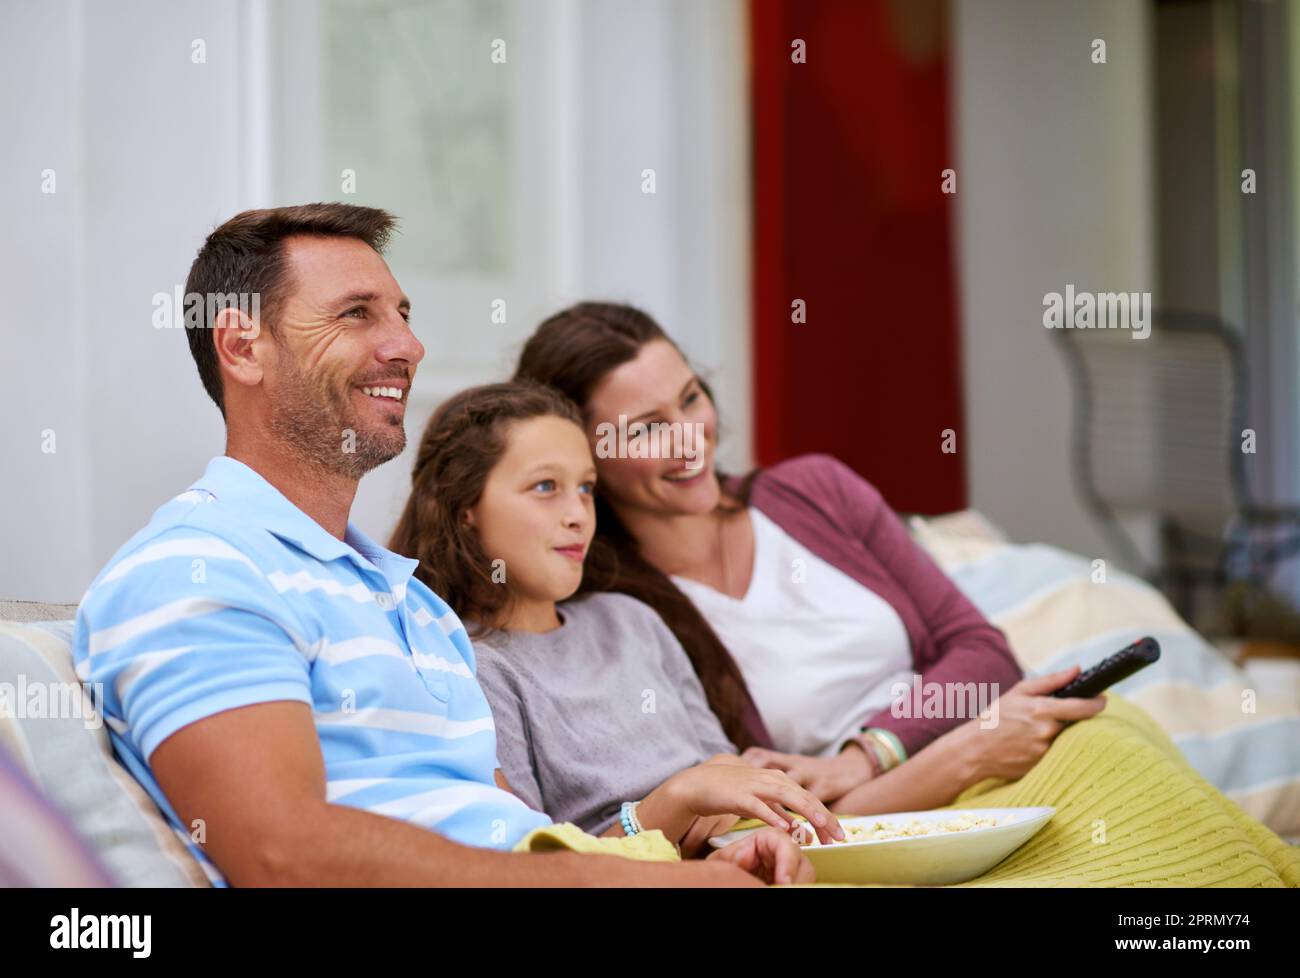 Its movie night. a family watching a movie on the sofa. Stock Photo